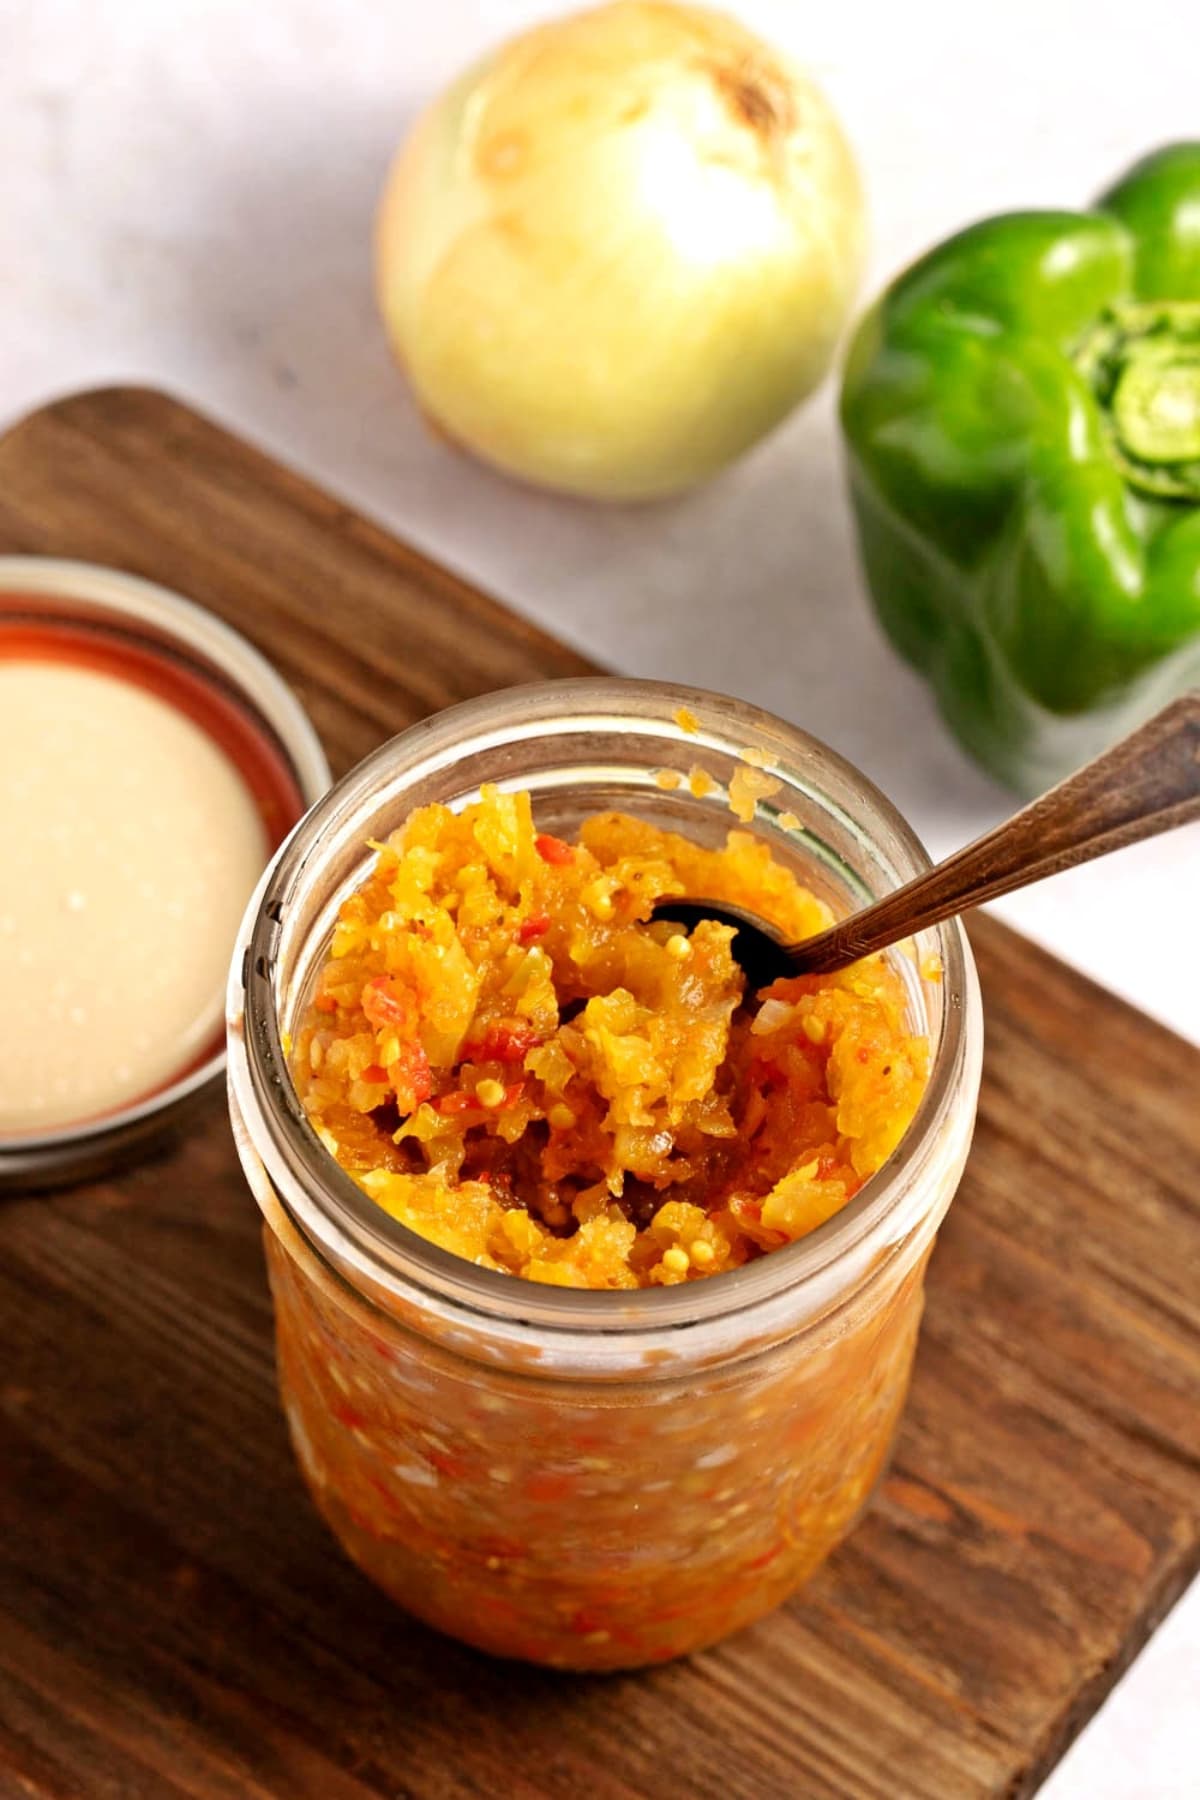 Homemade Sweet and Tangy Green Tomato Relish with Fresh Vegetables